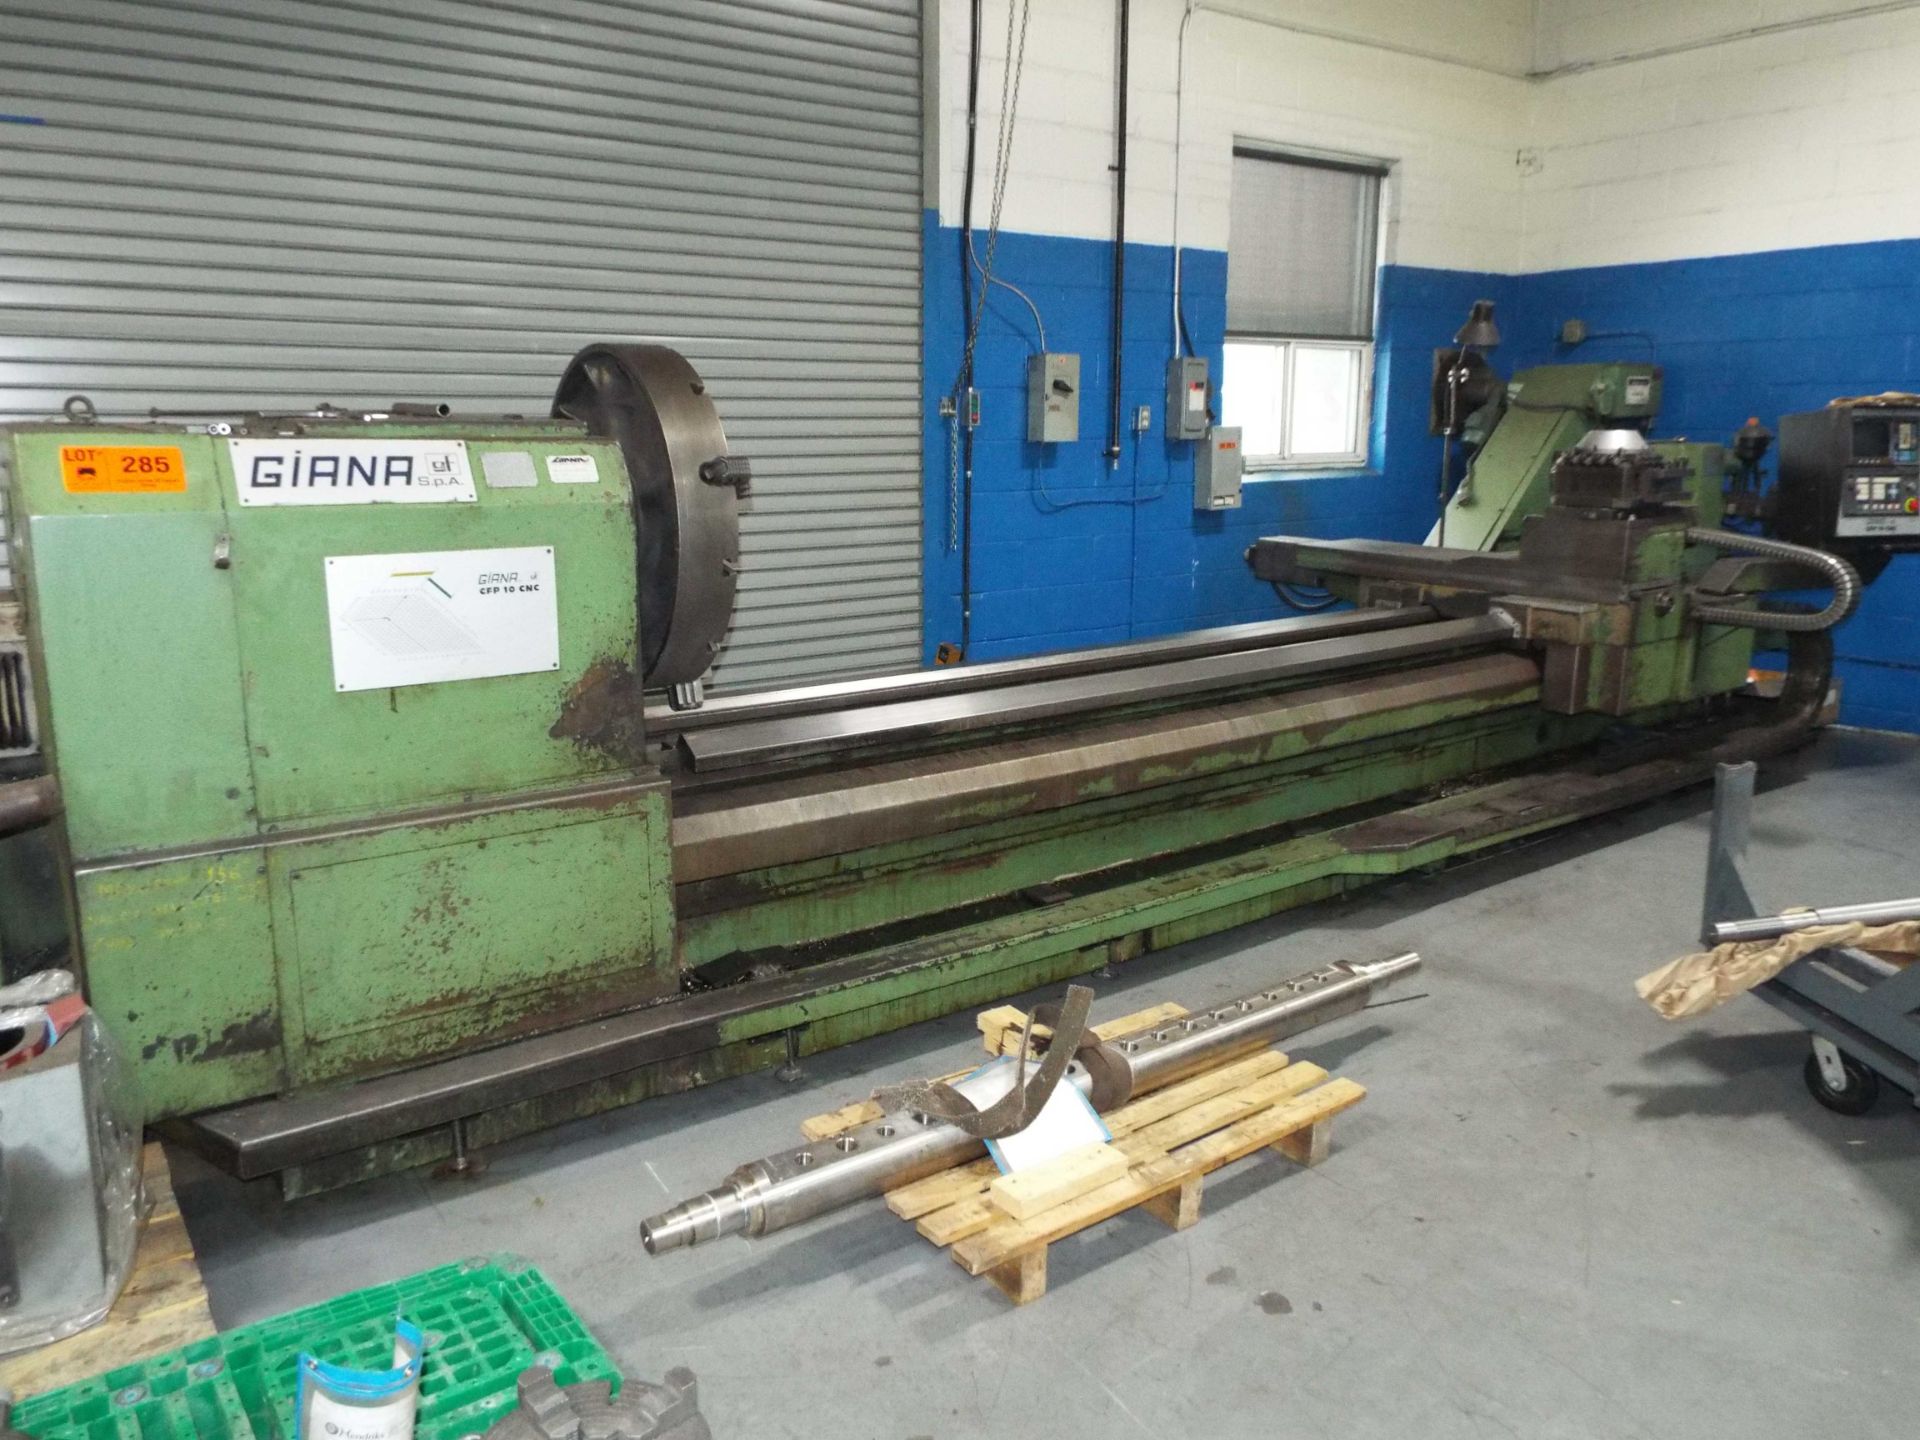 GIANA GFP 10 CNC LATHE WITH GE FANUC OT CNC CONTROL, 20" SWING OVER BED, 156" BETWEEN CENTERS, 4.75" - Image 2 of 11